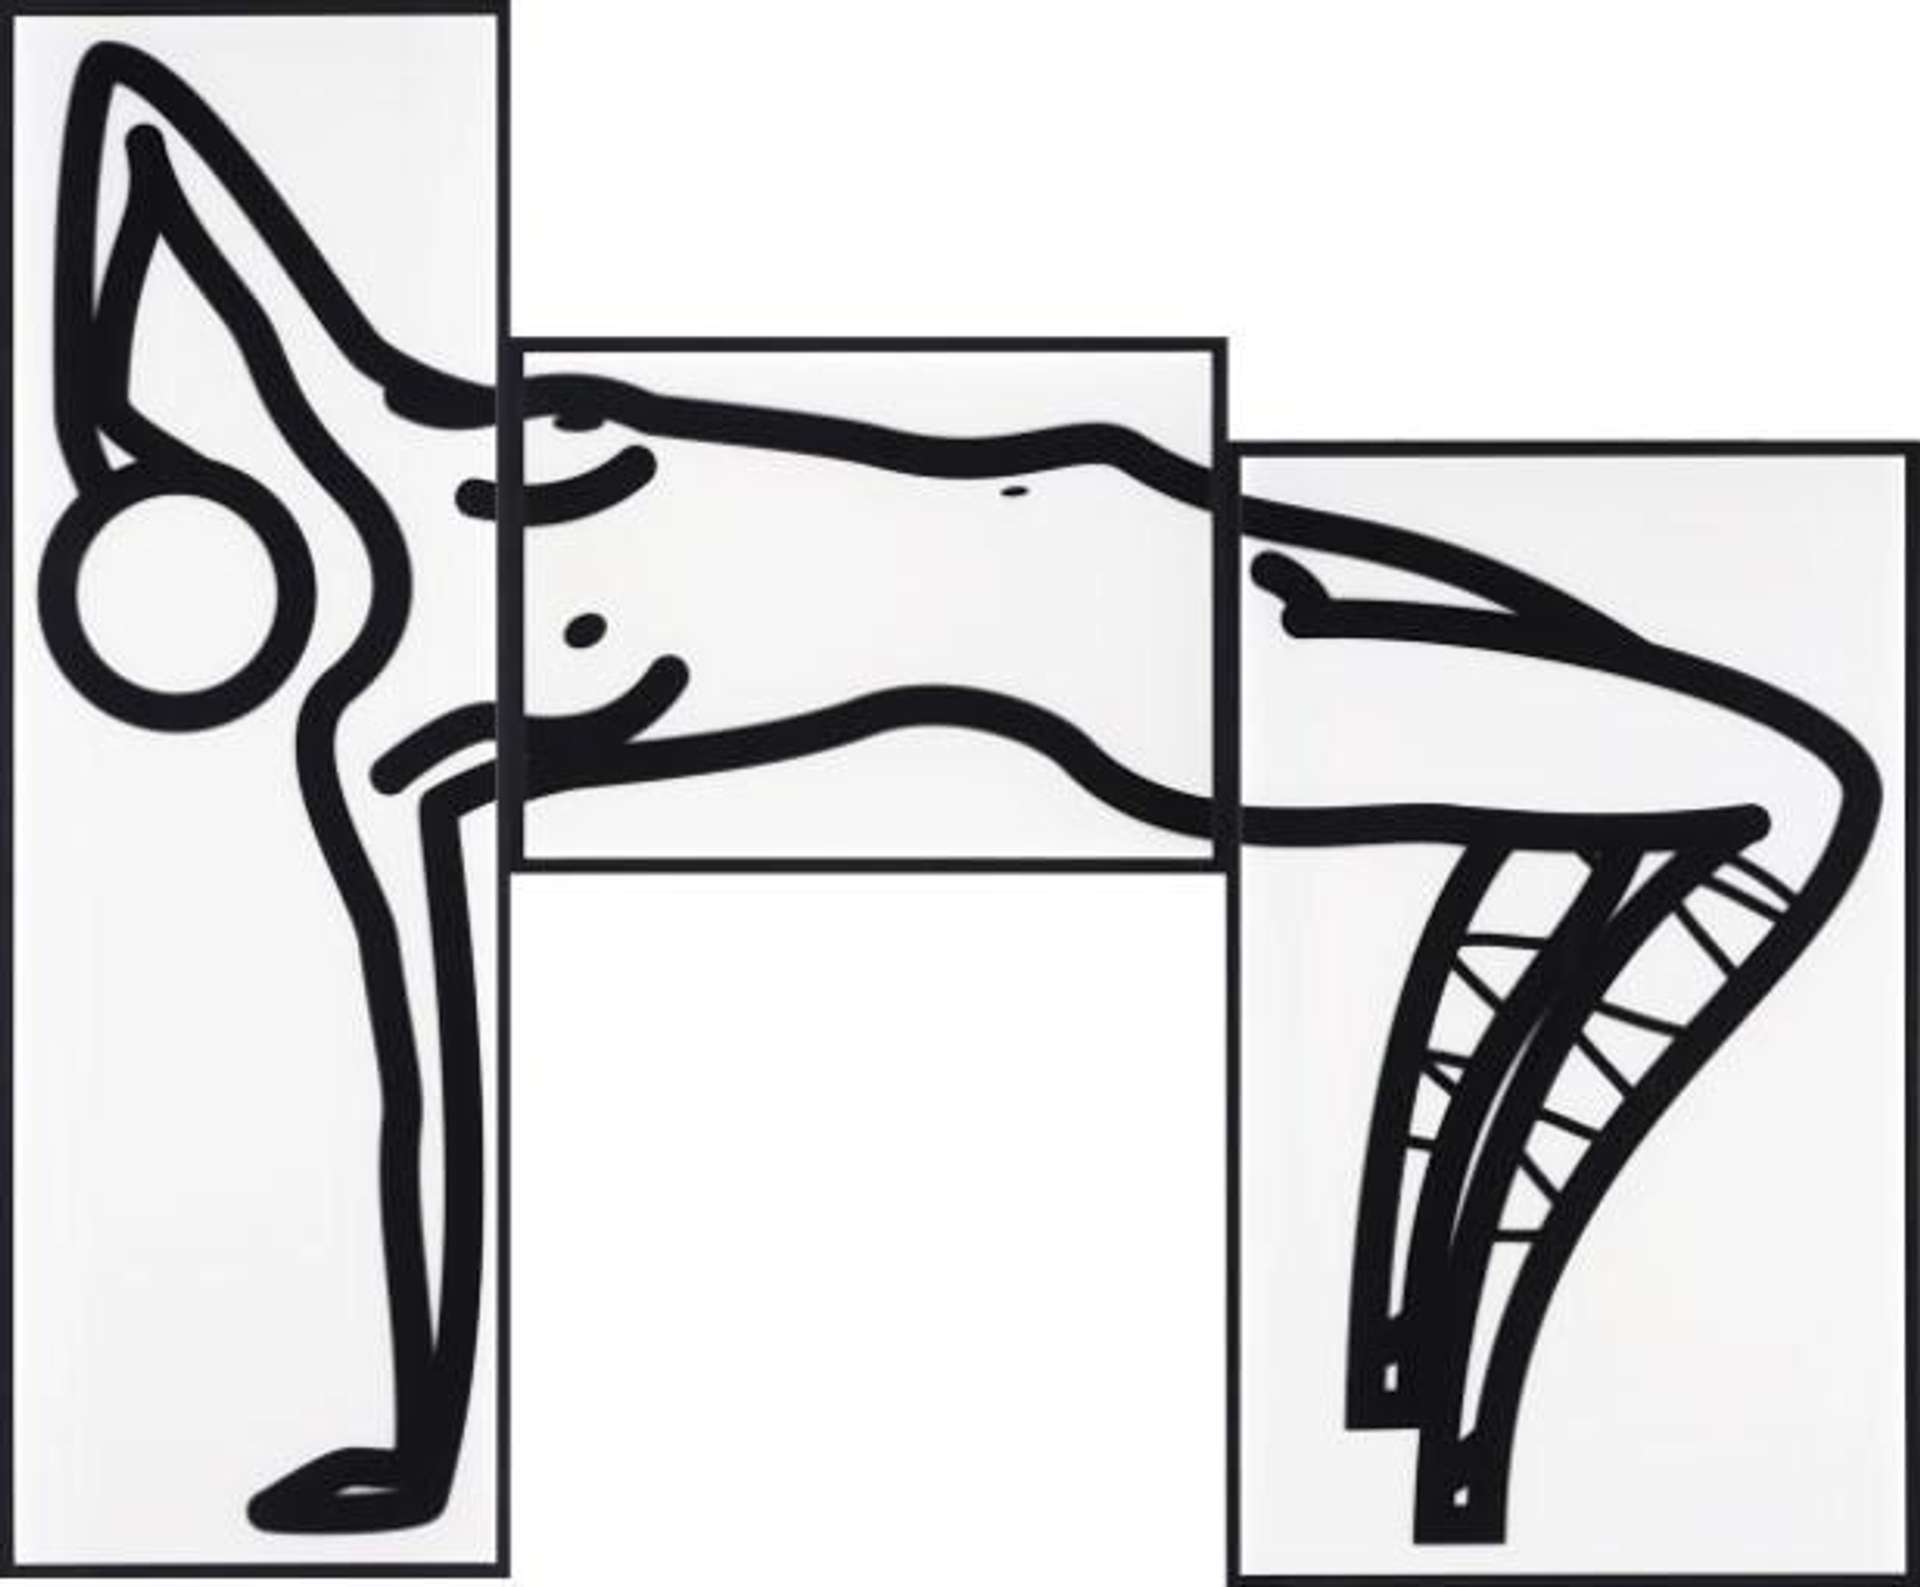 Julian Opie: This Is Shahnoza In 3 Parts 1 - Signed Mixed Media